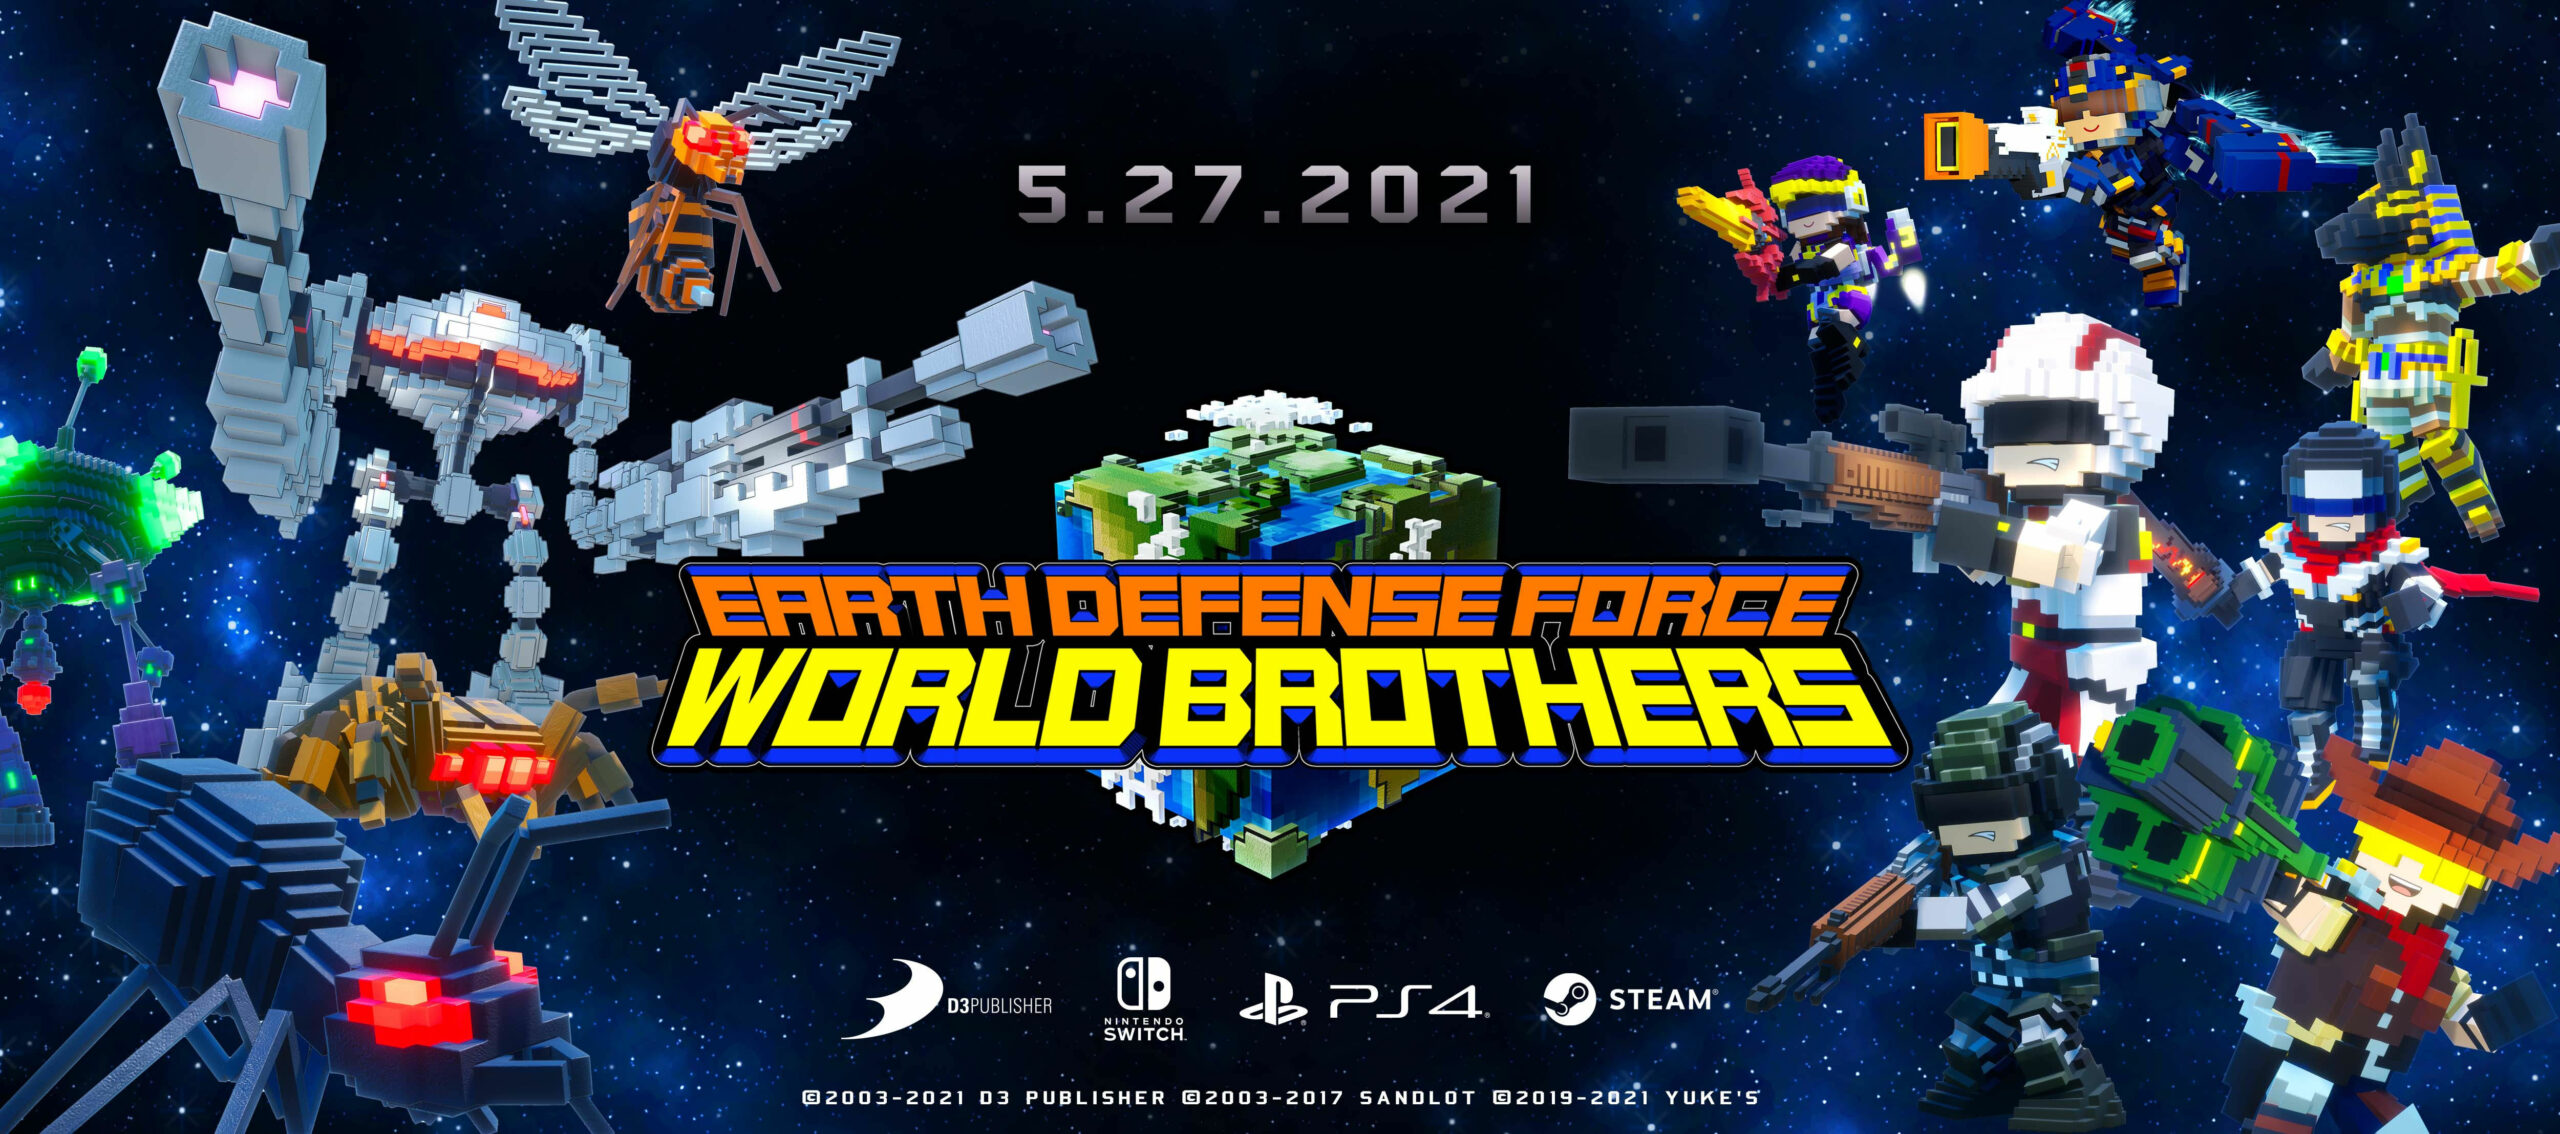 Earth Defense Force : World Brothers est disponible !